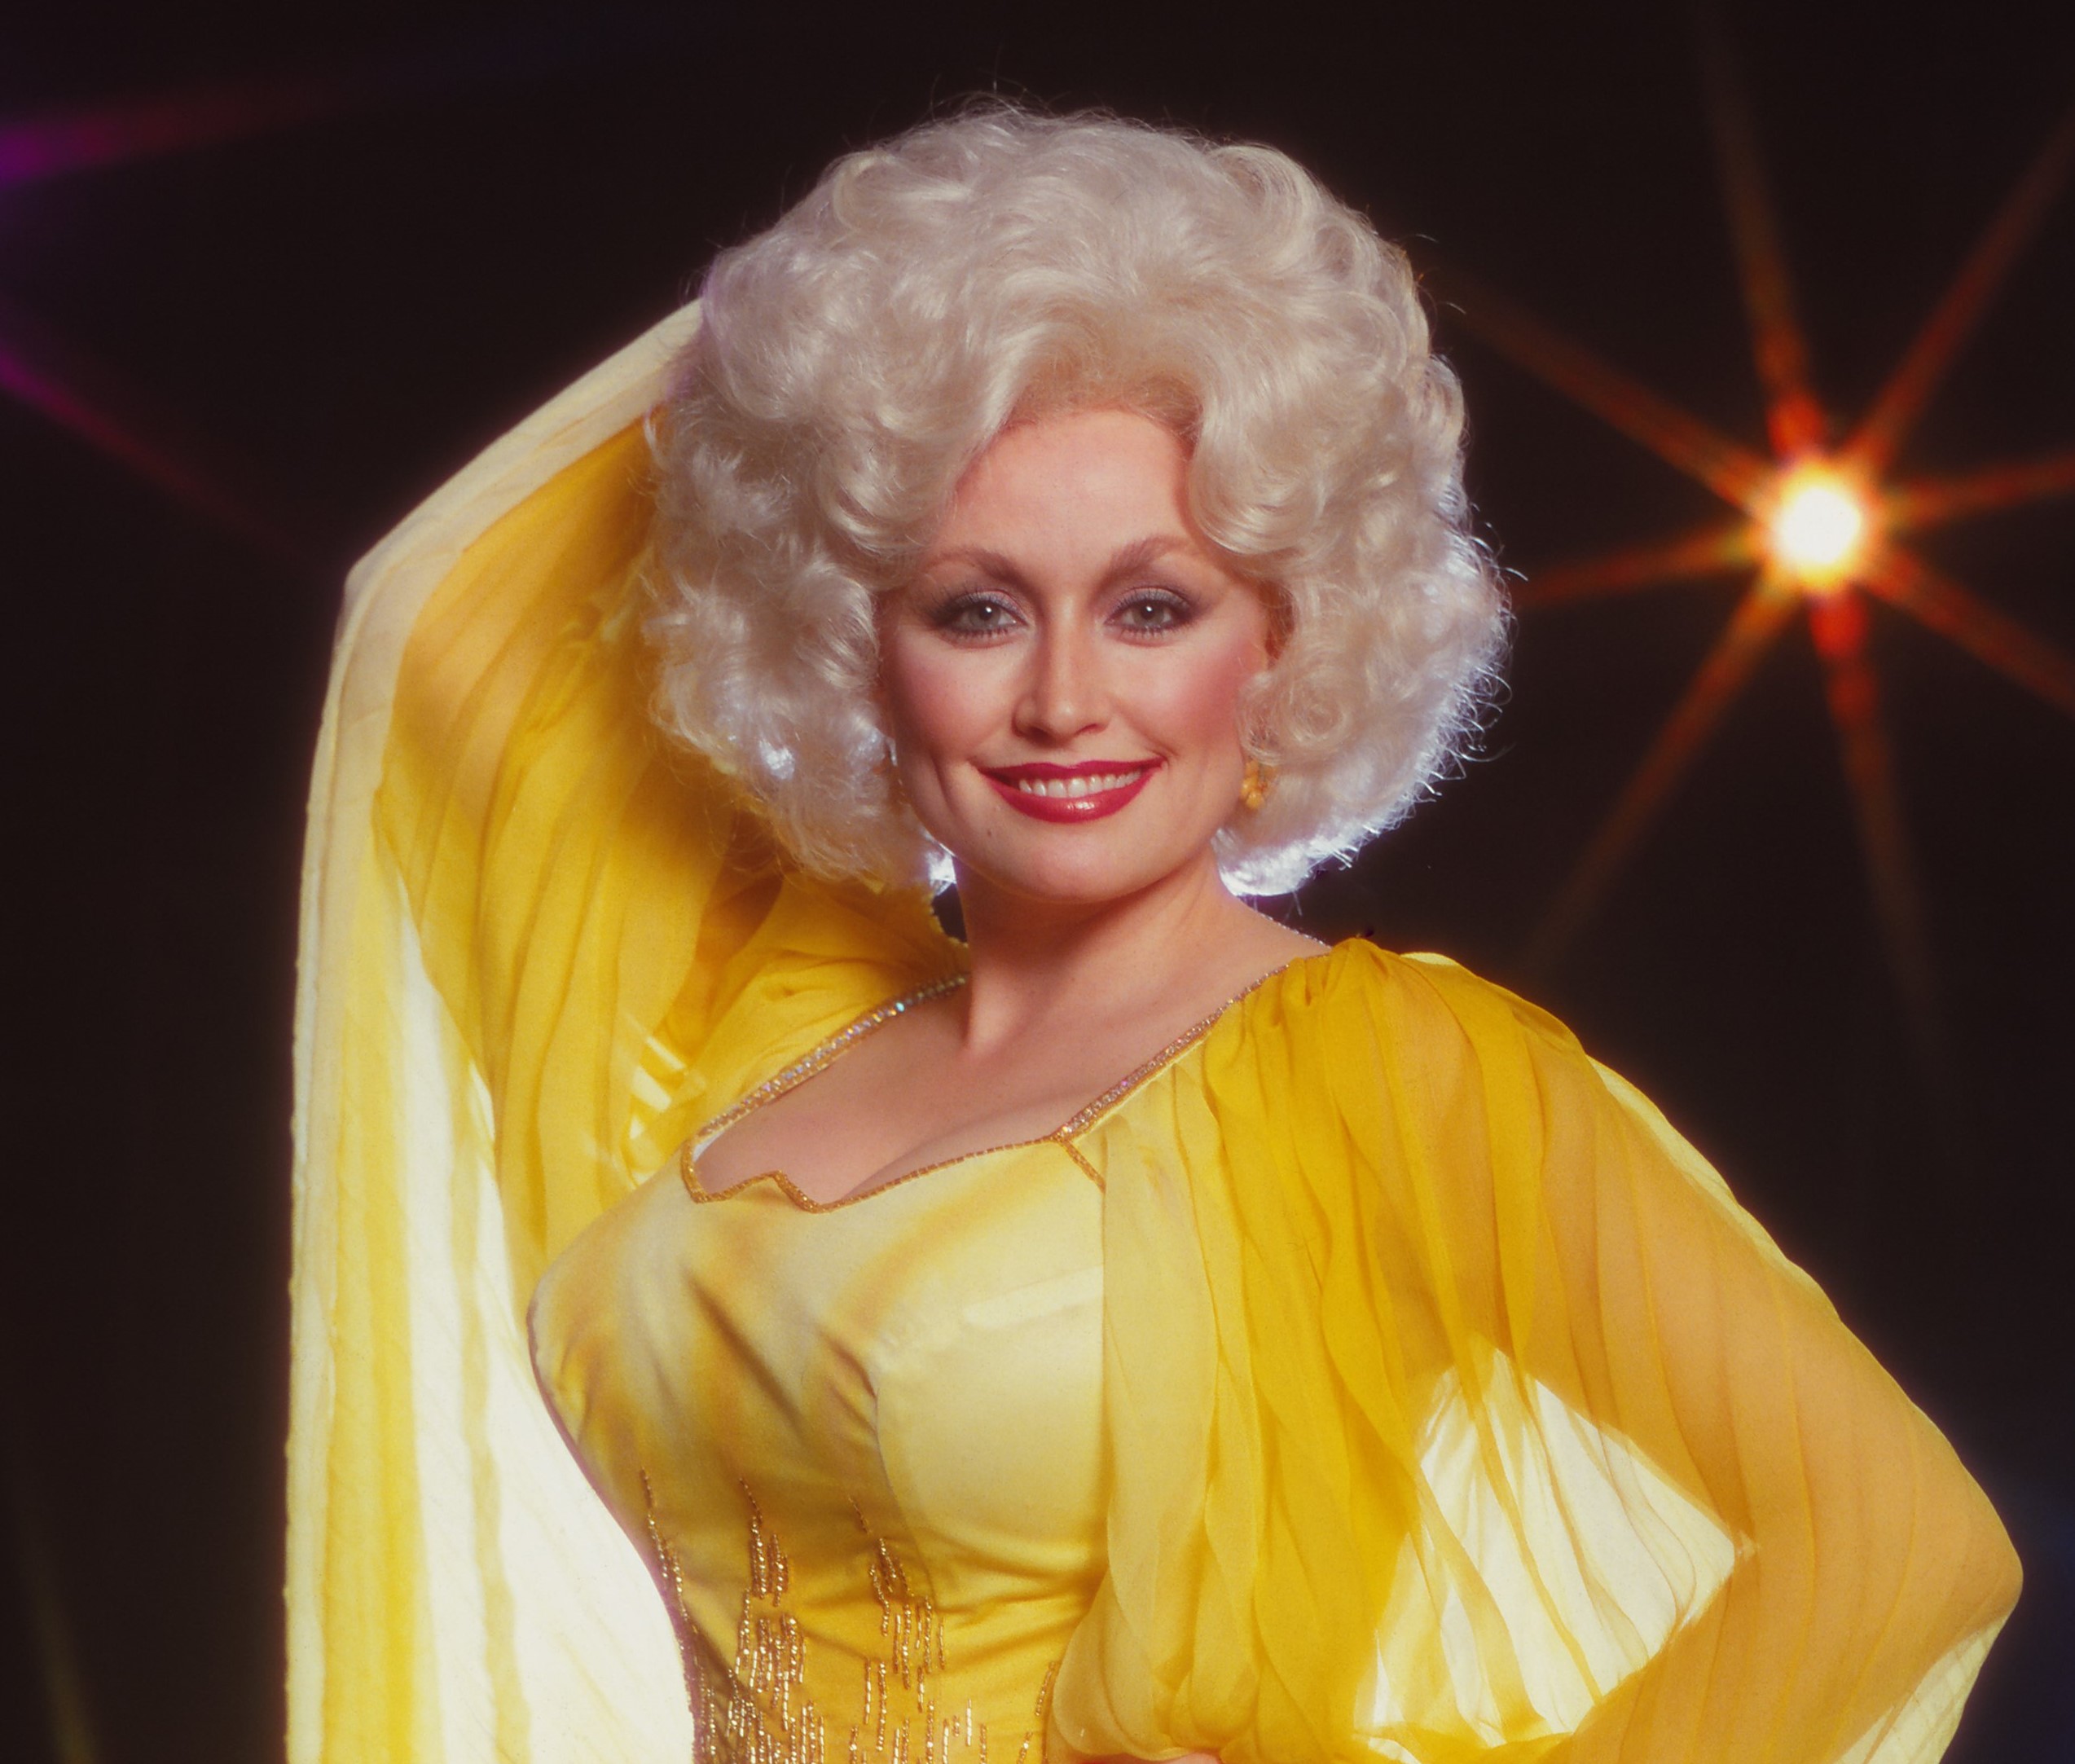 Dolly Parton wears a yellow dress and stands with one hand on her hip and one behind her head.